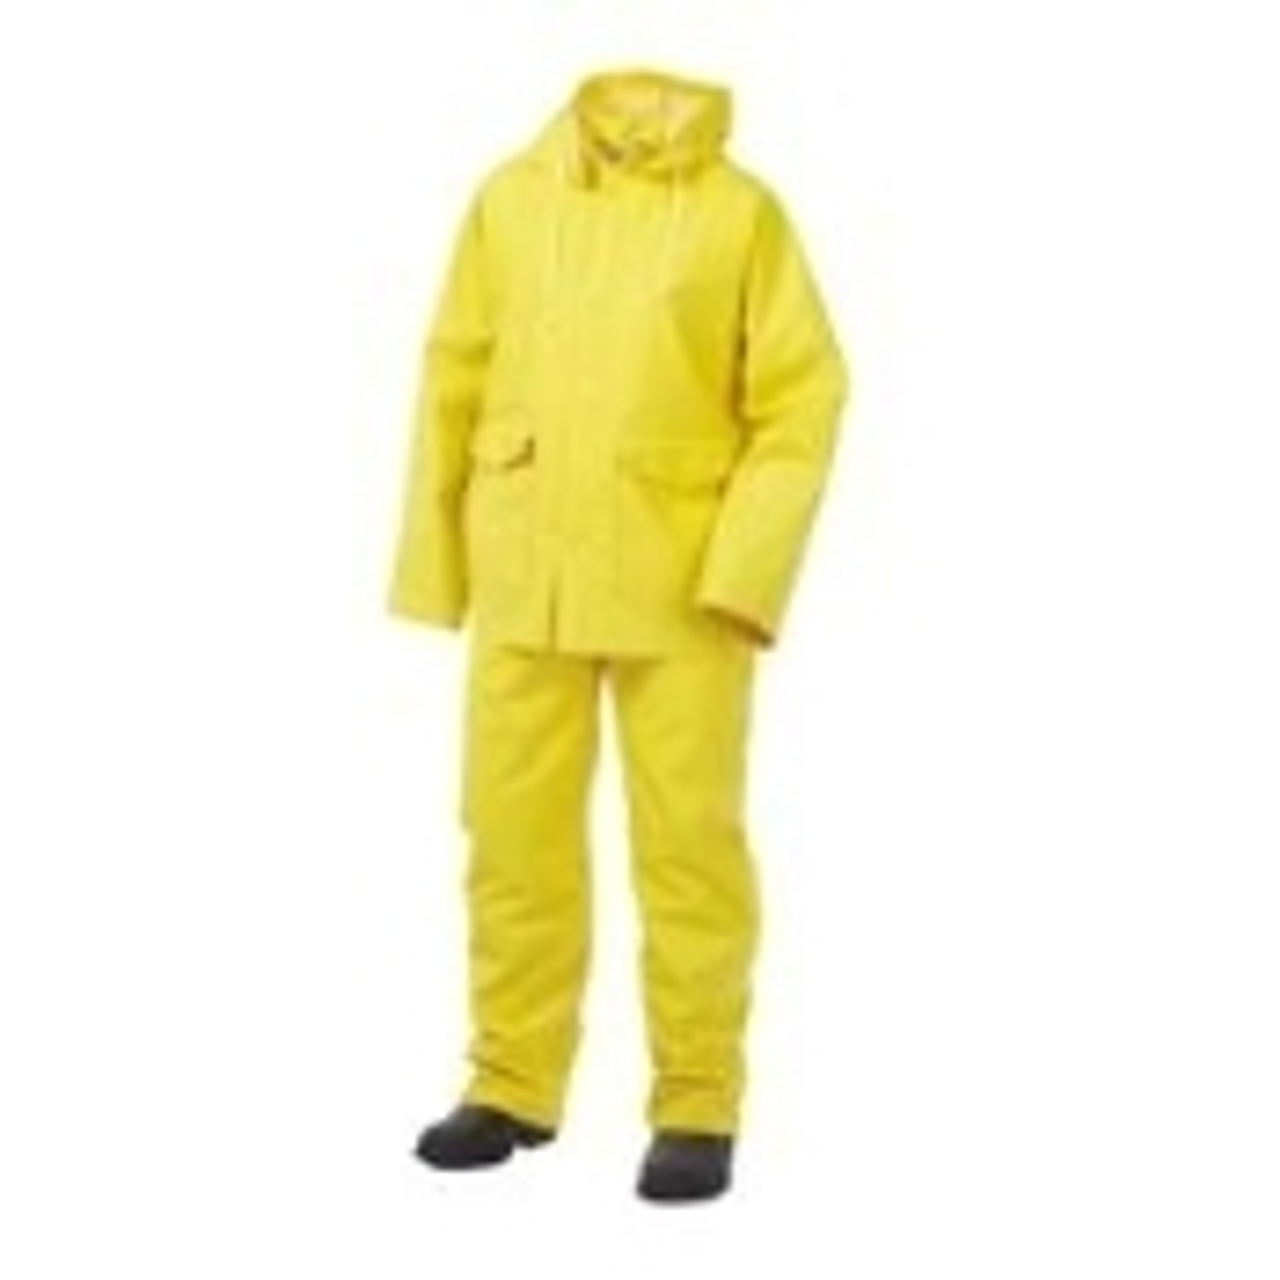 .35mm 3pc Vinyl Rain Suit 

3 Piece Classic Rain Suit is industry standard grade PVC and polyester materials comes complete with bib pants, jacket, and detachable hood